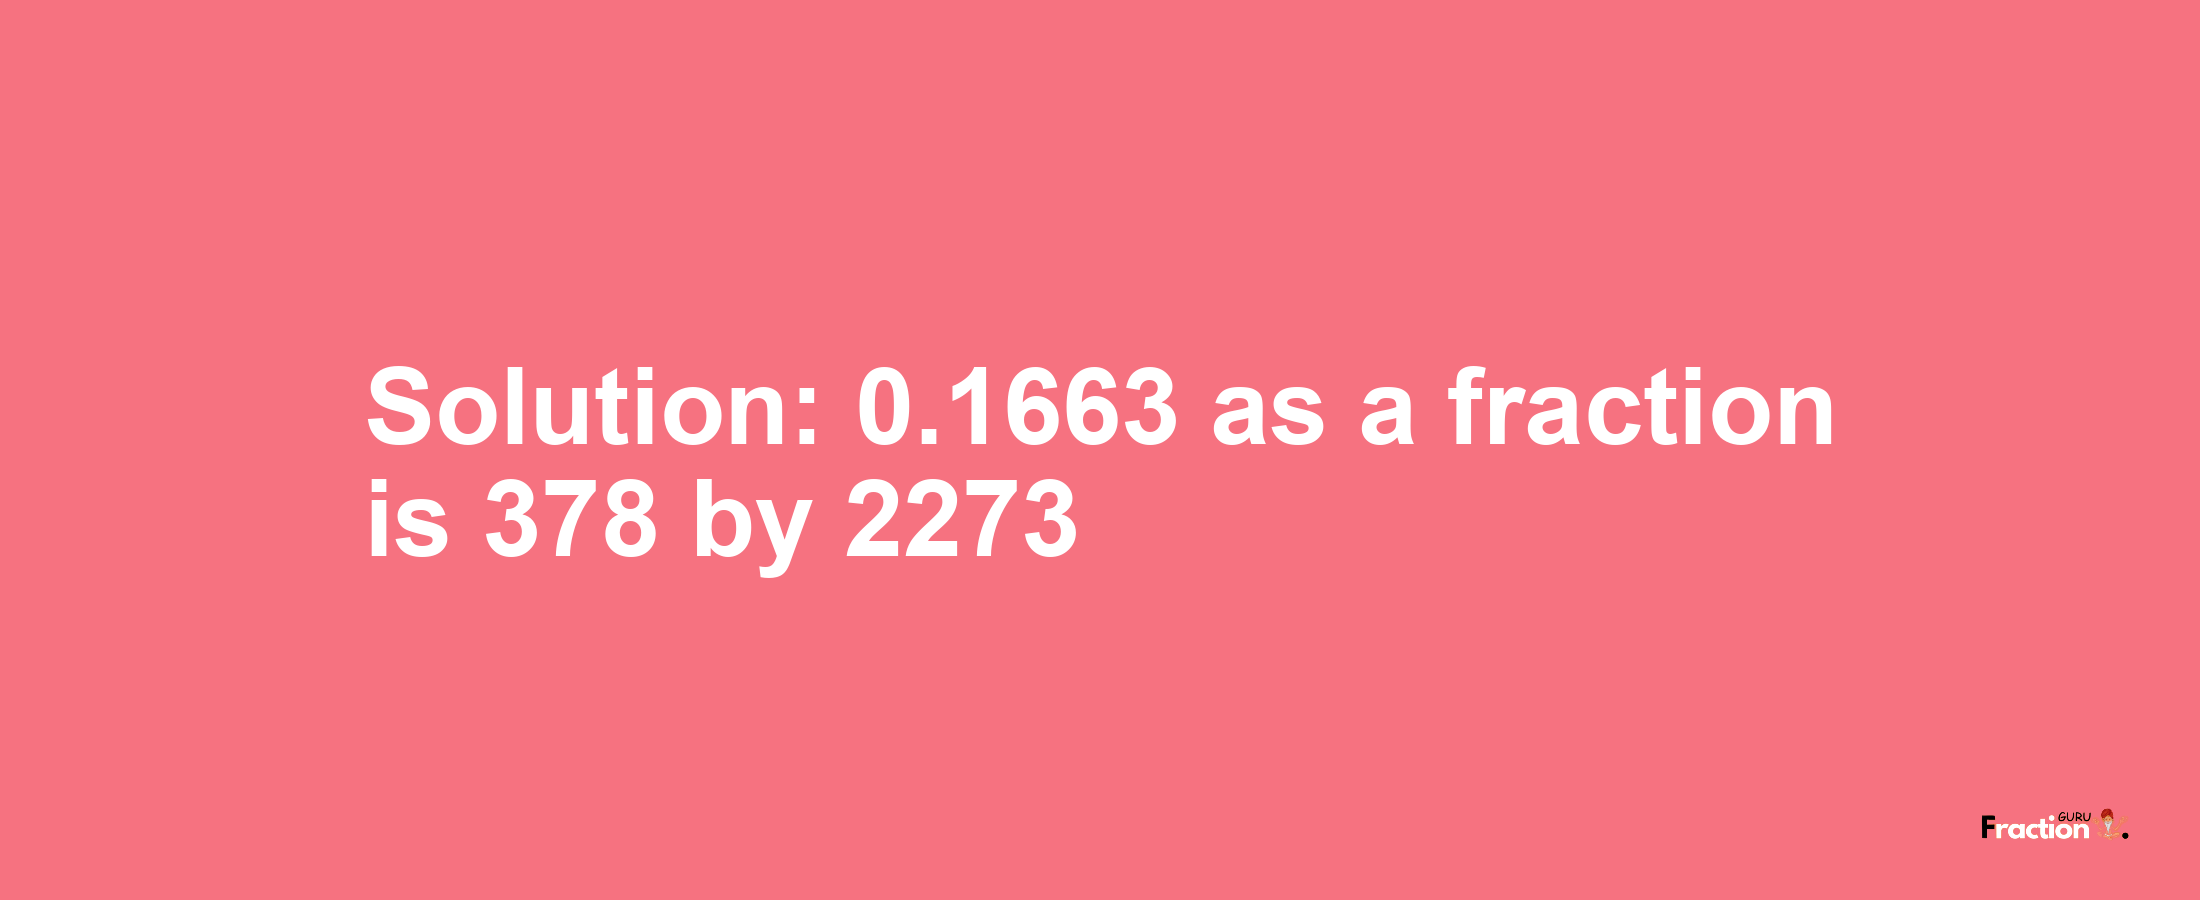 Solution:0.1663 as a fraction is 378/2273